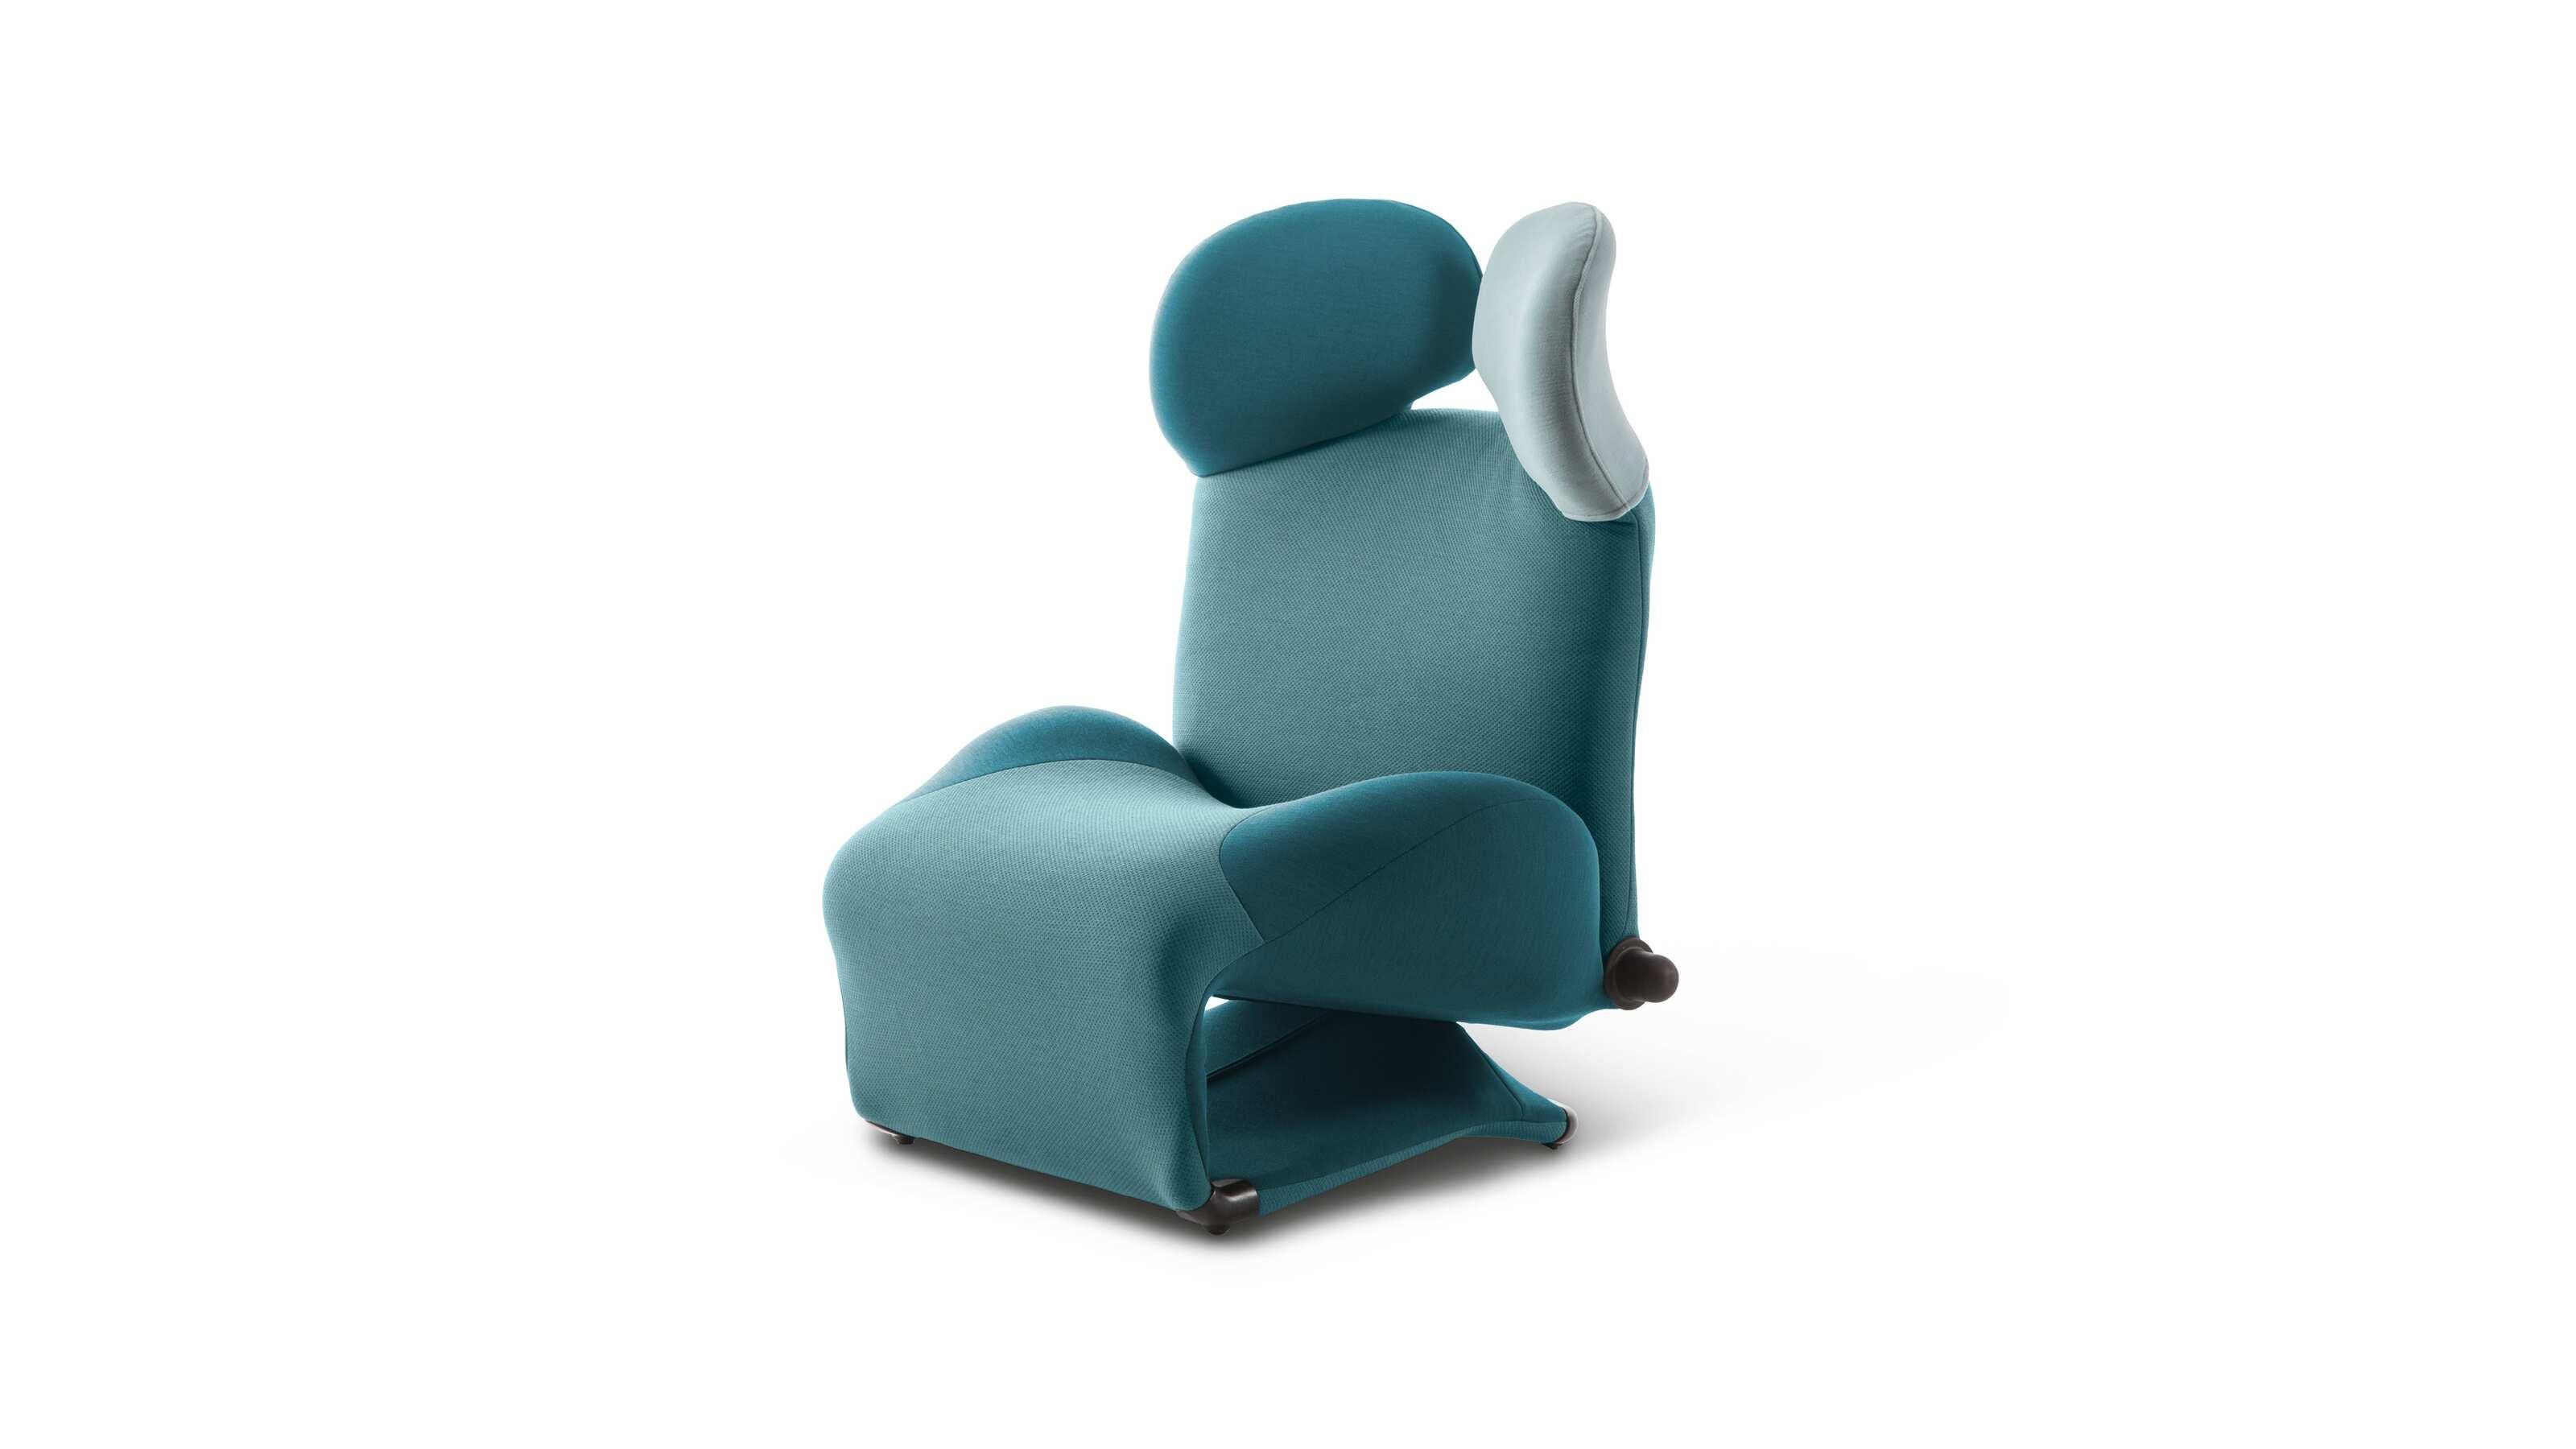 Wink Armchair by Toshiyuki Kita for Cassina

Ergonomically correct and exquisitely versatile, Cassina’s Wink armchair cleverly unfolds into a chaise-longue. “Sitting on Wink means sitting on the floor and, when you are seated there, according to